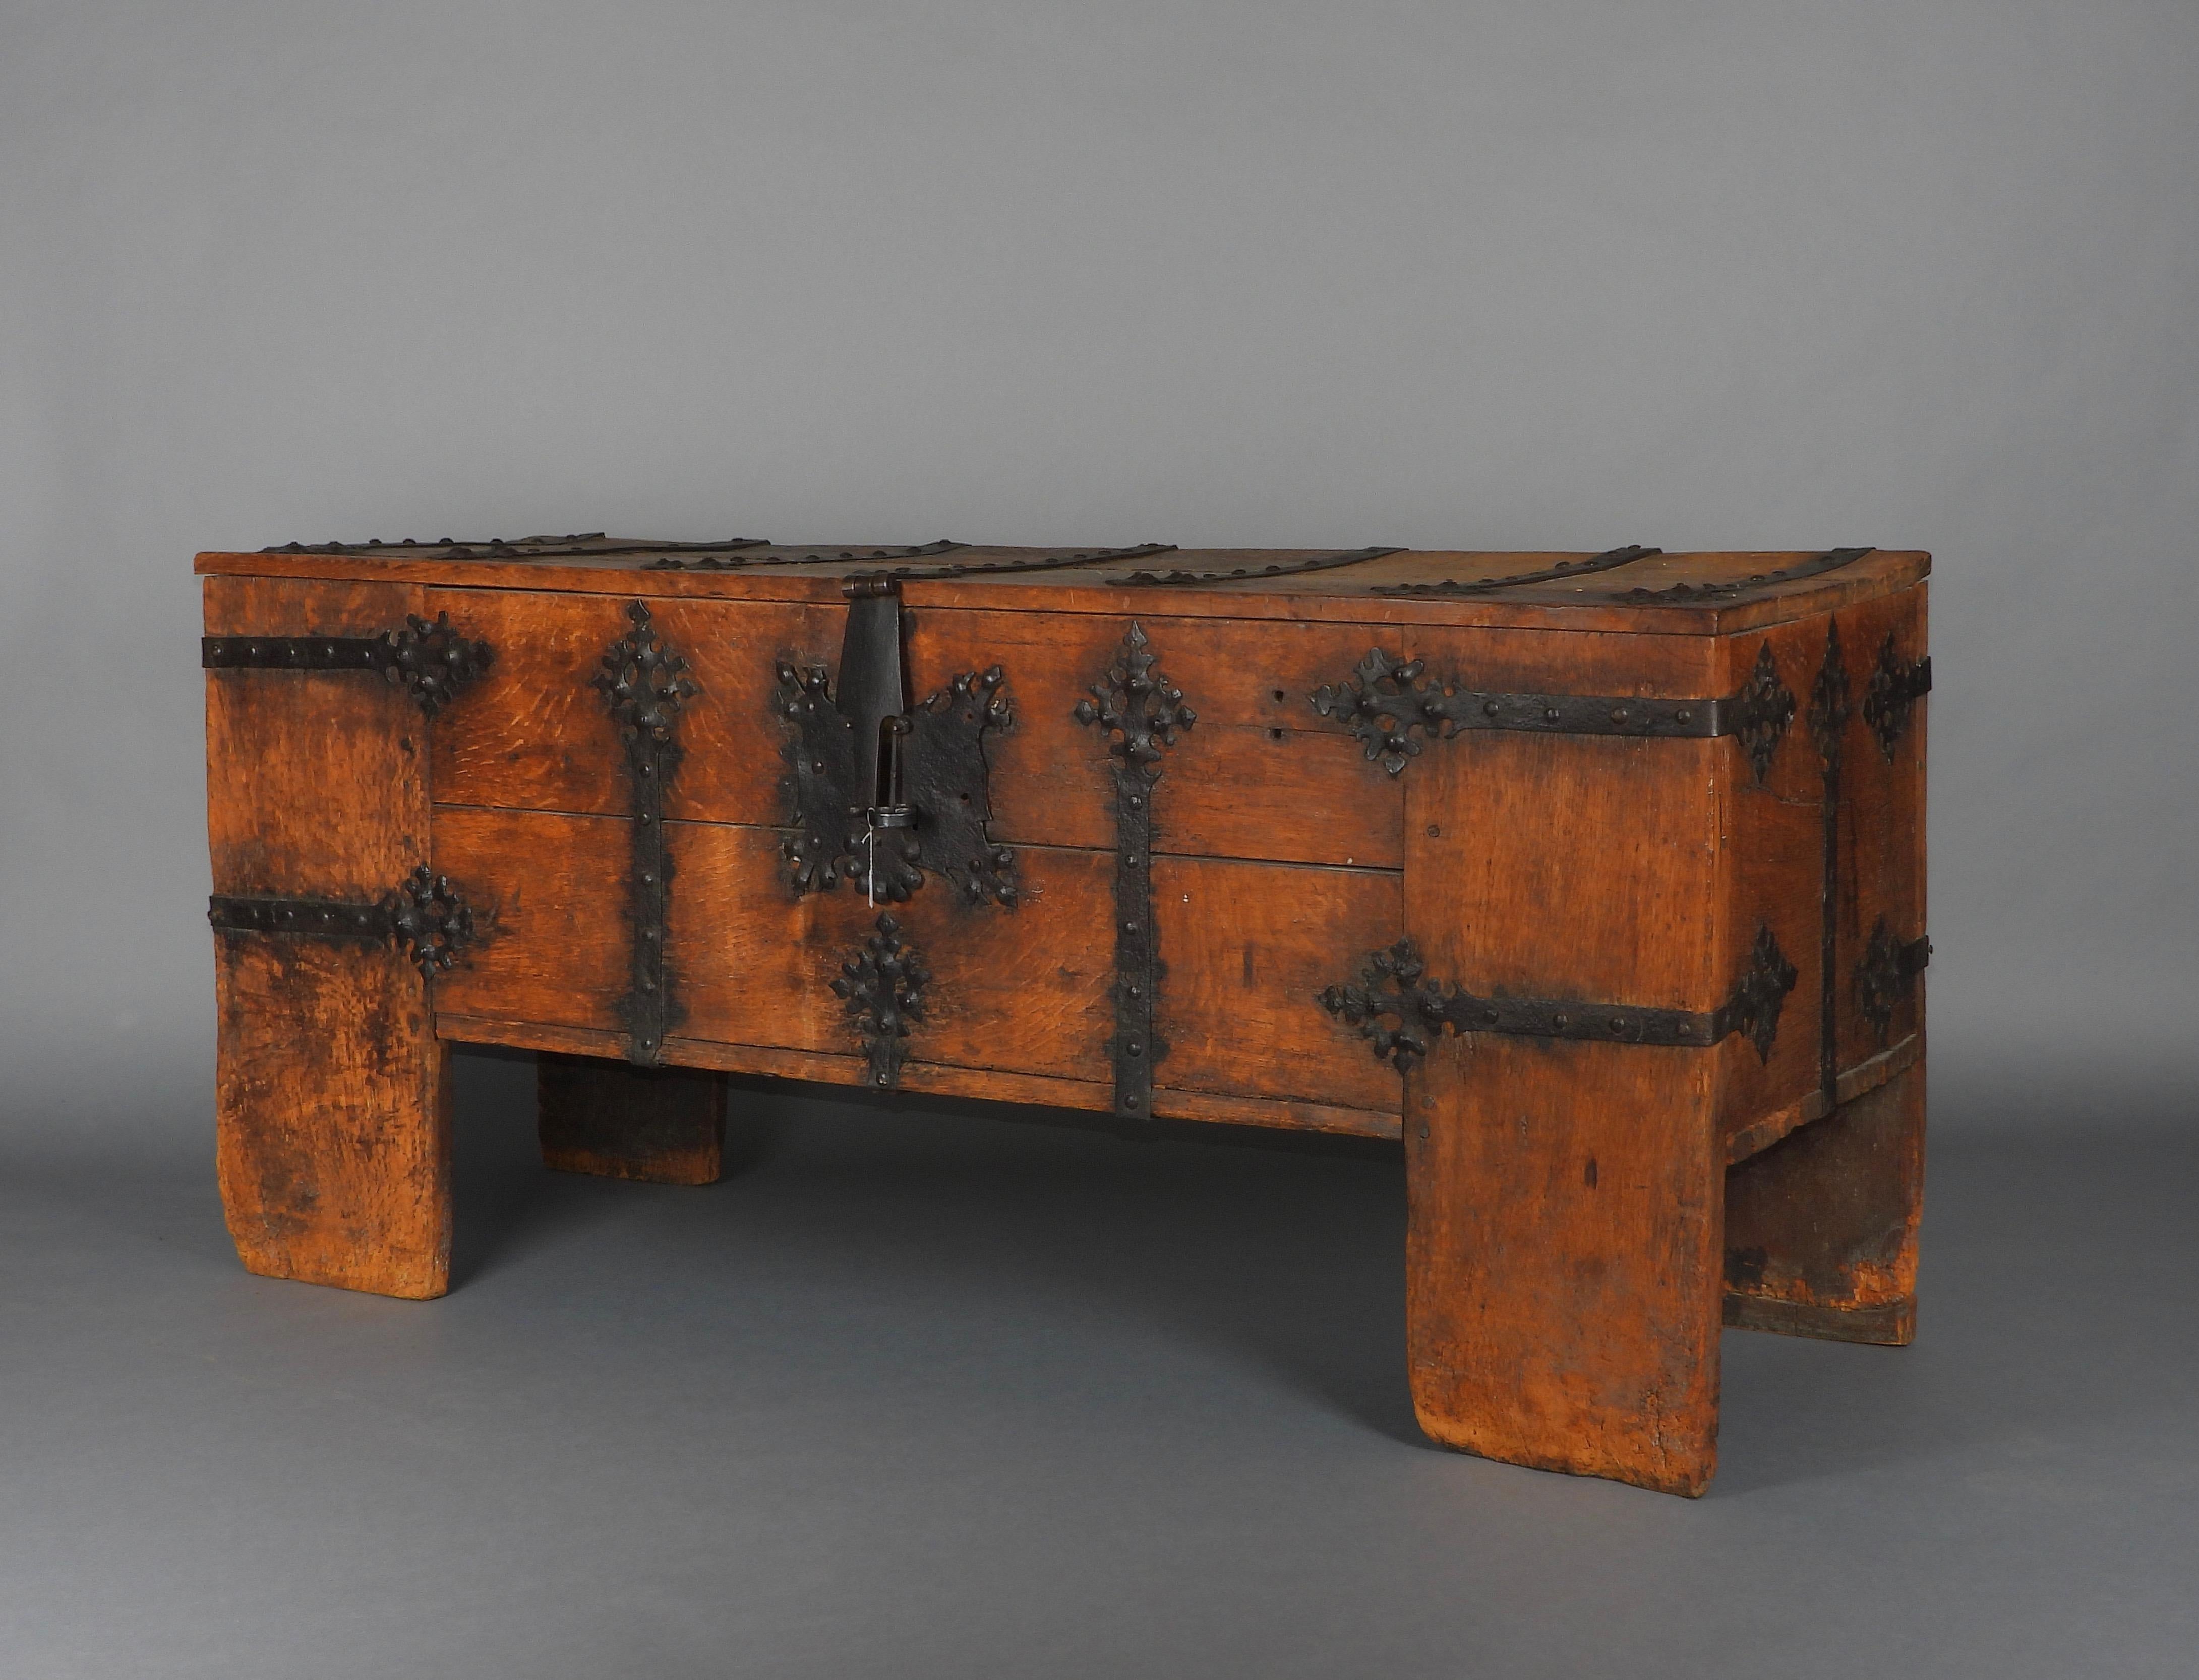 Rare Late Medieval 16th Century German Wrought Iron Oak Chest For Sale 1